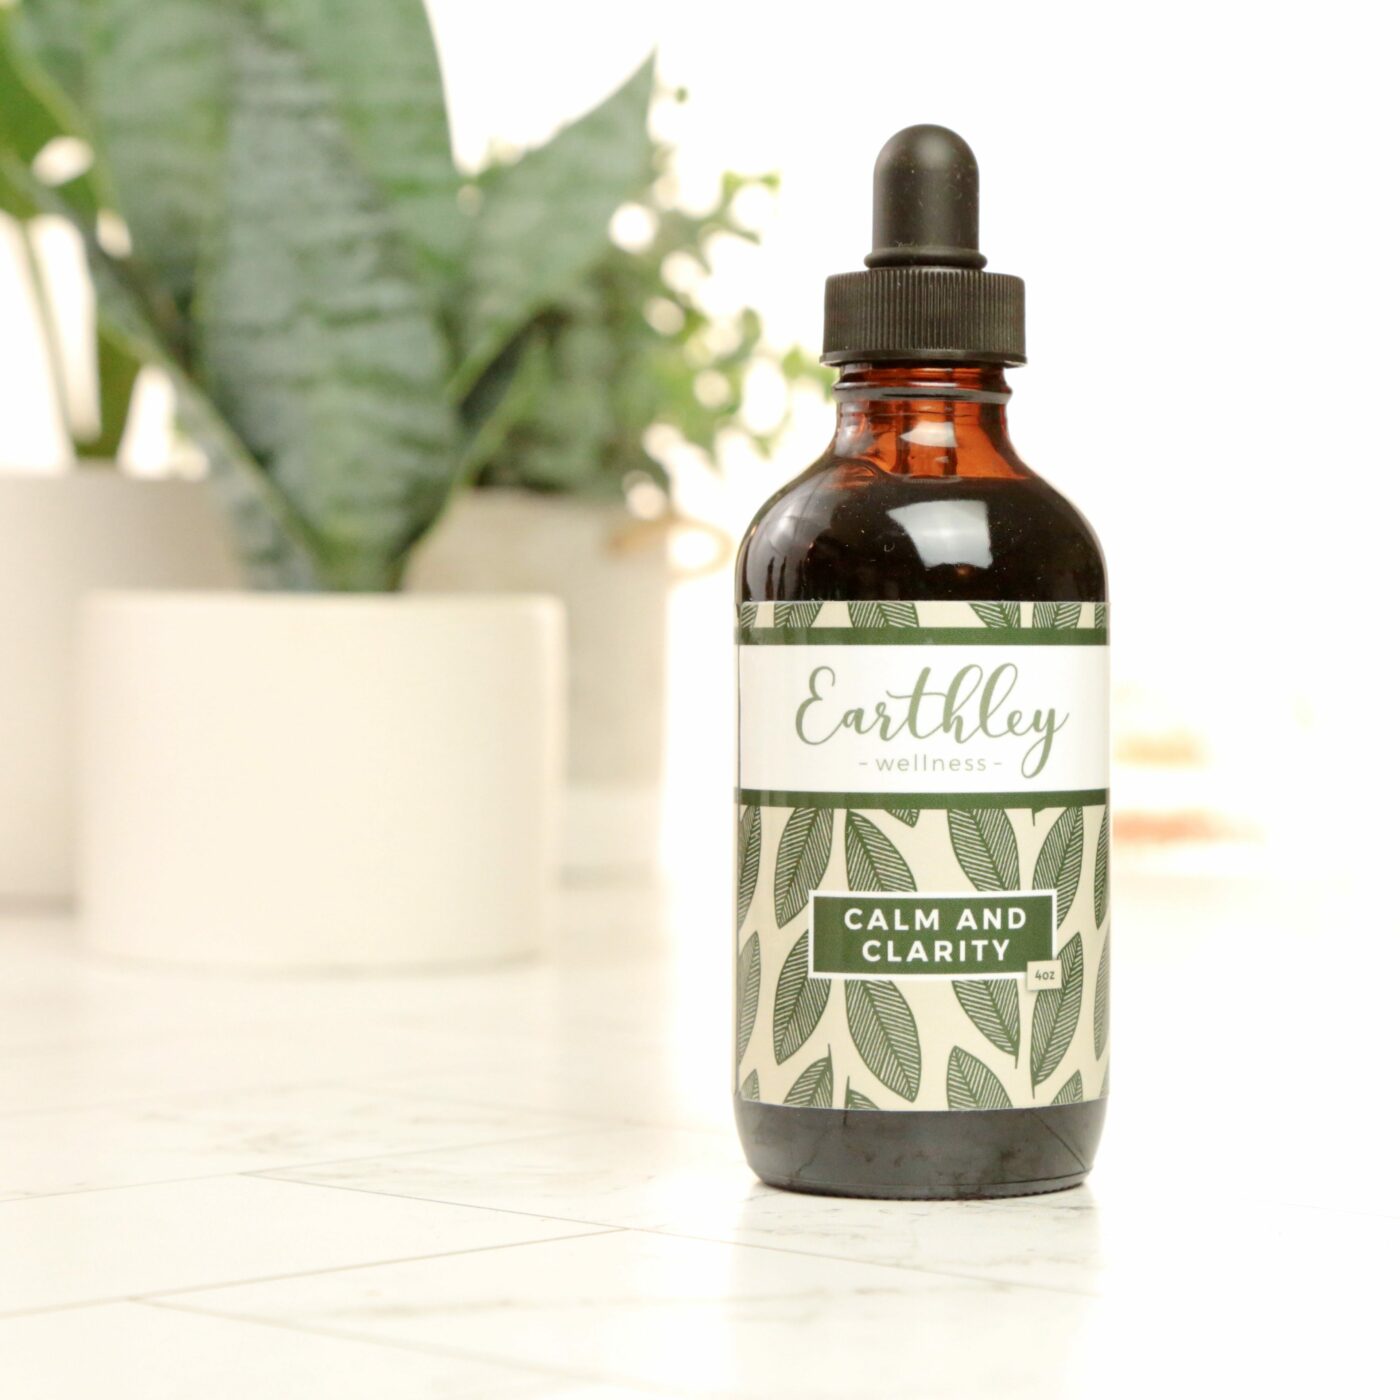 Earthley Wellness Anxiety Relief Drops 1 oz. Certified Organic